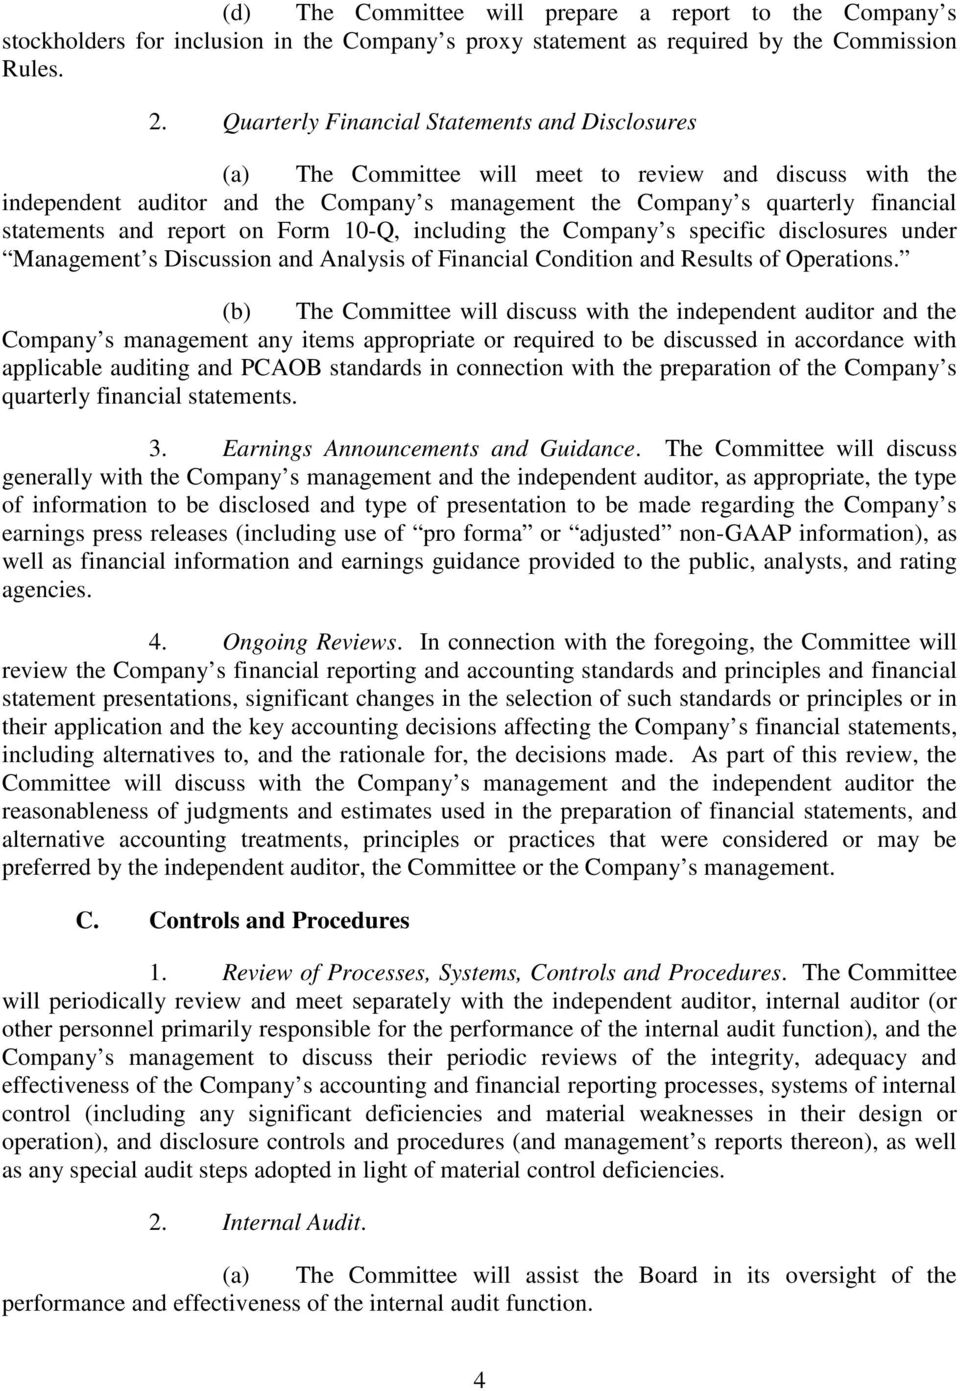 and report on Form 10-Q, including the Company s specific disclosures under Management s Discussion and Analysis of Financial Condition and Results of Operations.